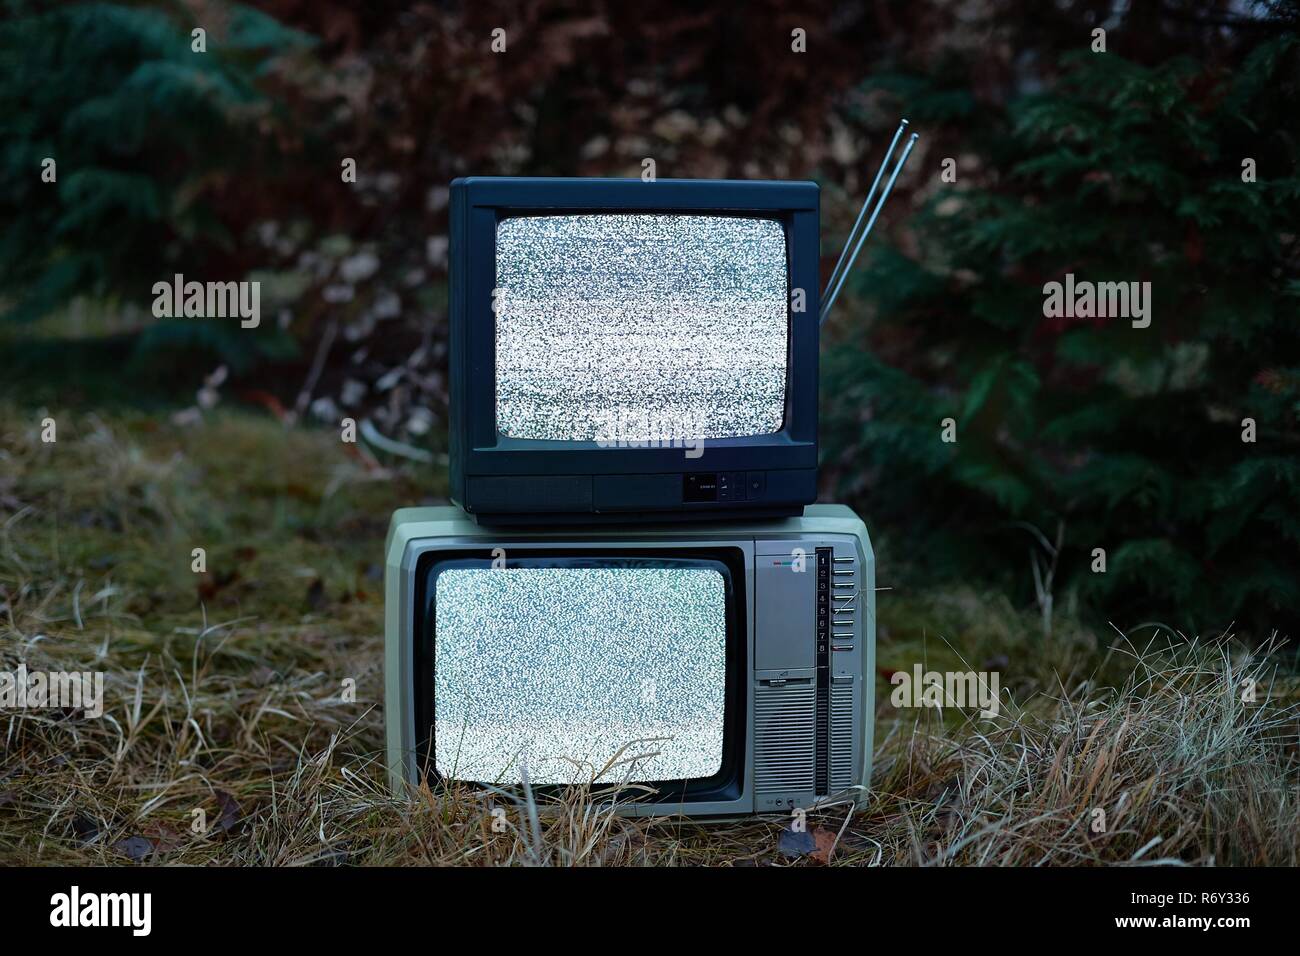 TV no signal in grass Stock Photo